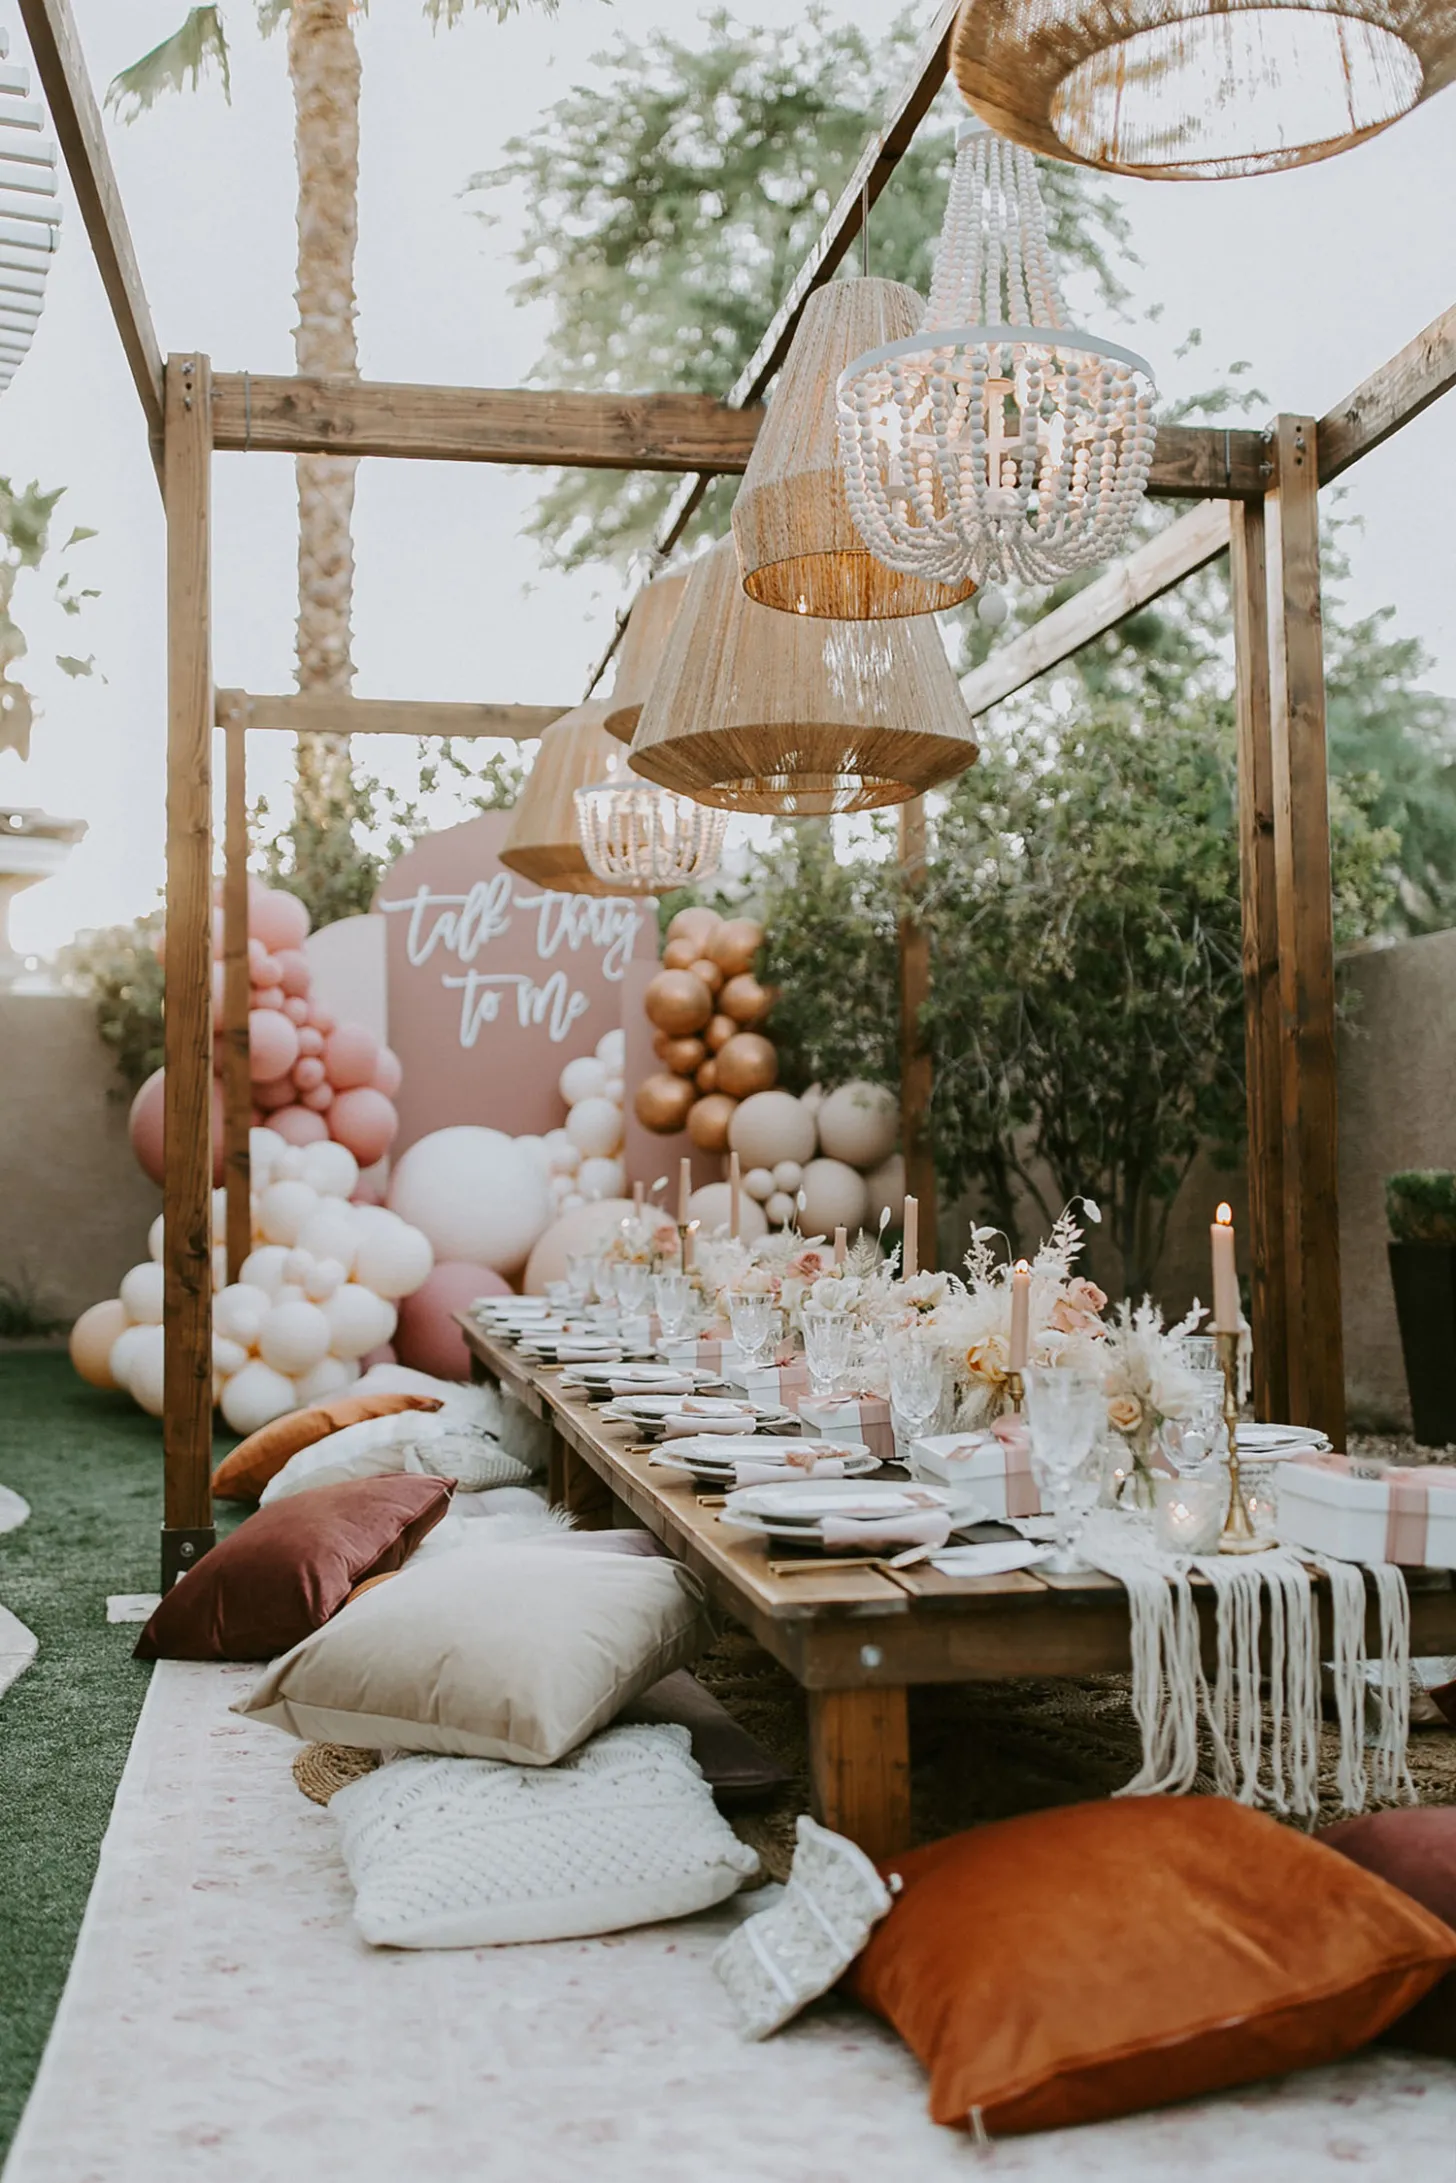 low outdoors picnic bridal shower ideas